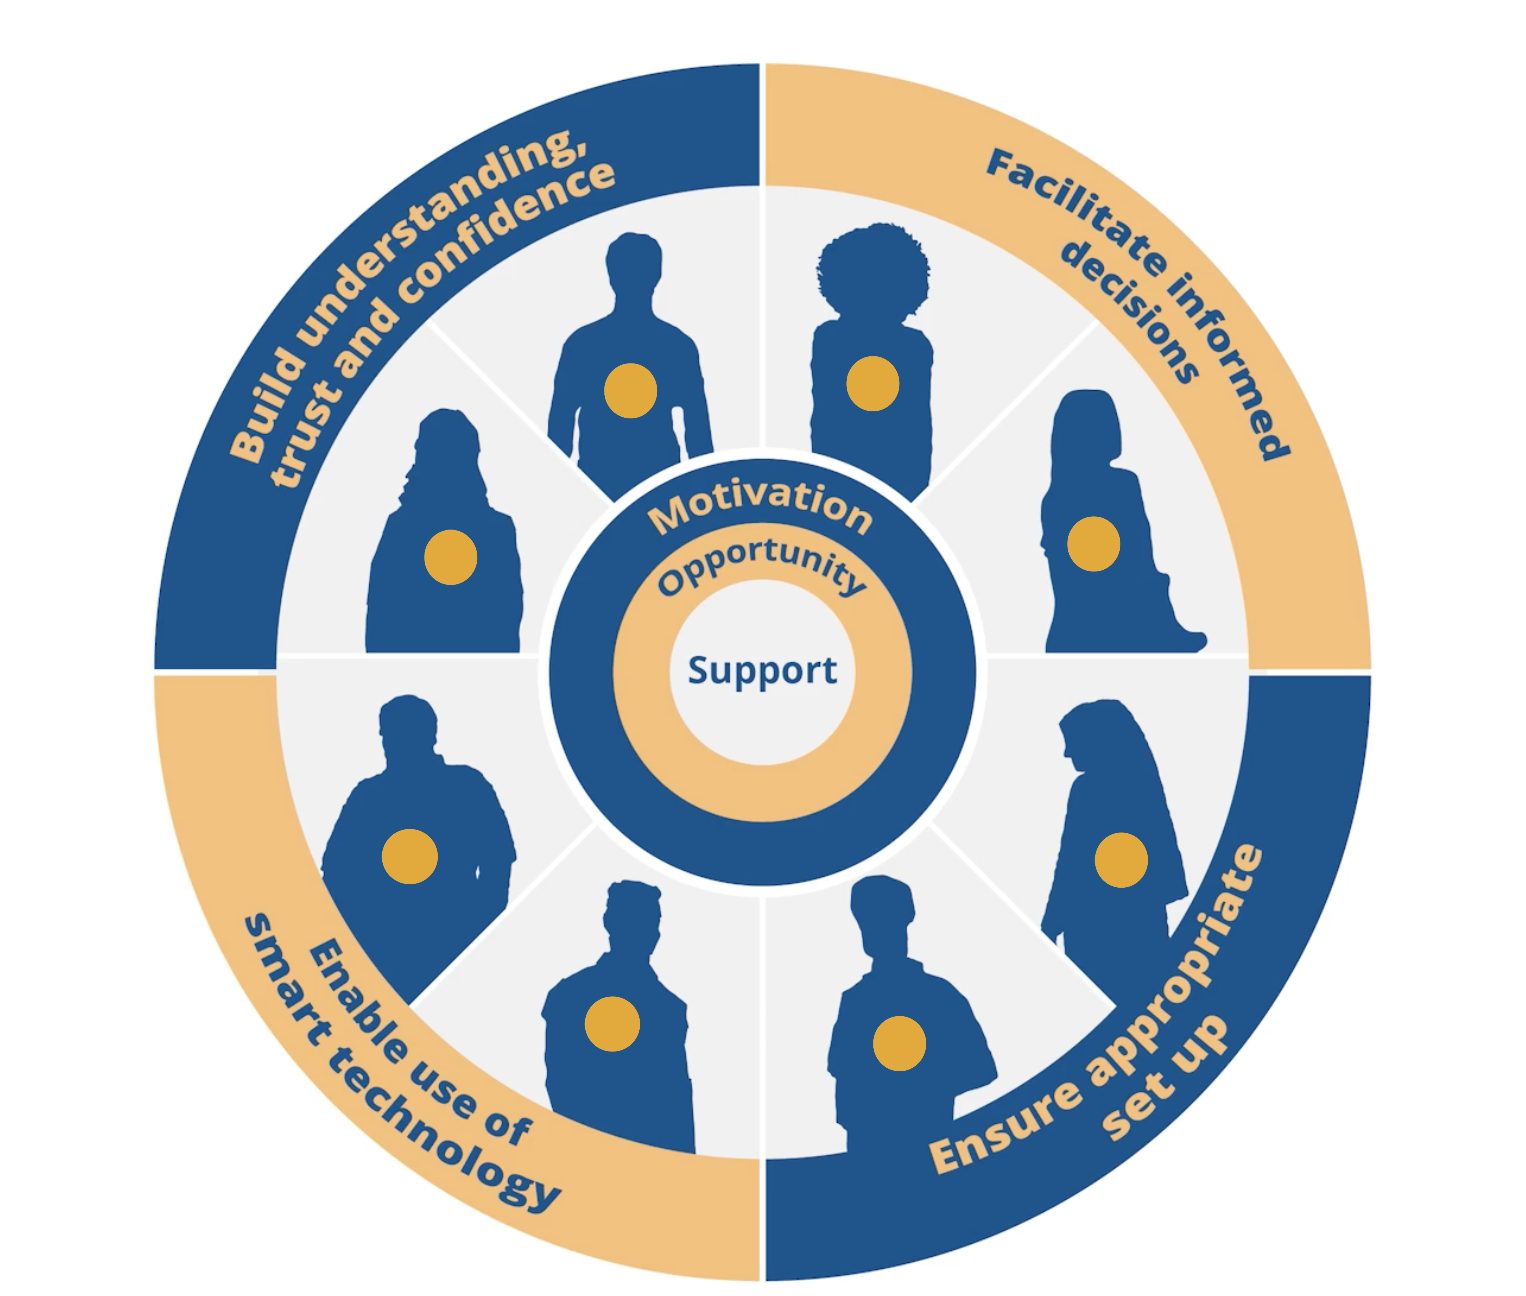 A screenshot of Citizen's Advice Interactive Tool showing a wheel of human silhouettes separated into four sections "Build and understanding, trust and confidence", "Facilitate, informed decisions", "Enable use of smart technology" and "ensure appropriate set up" with a centre mentioning, 3 categories "motivation", "opportunity" and "support". 